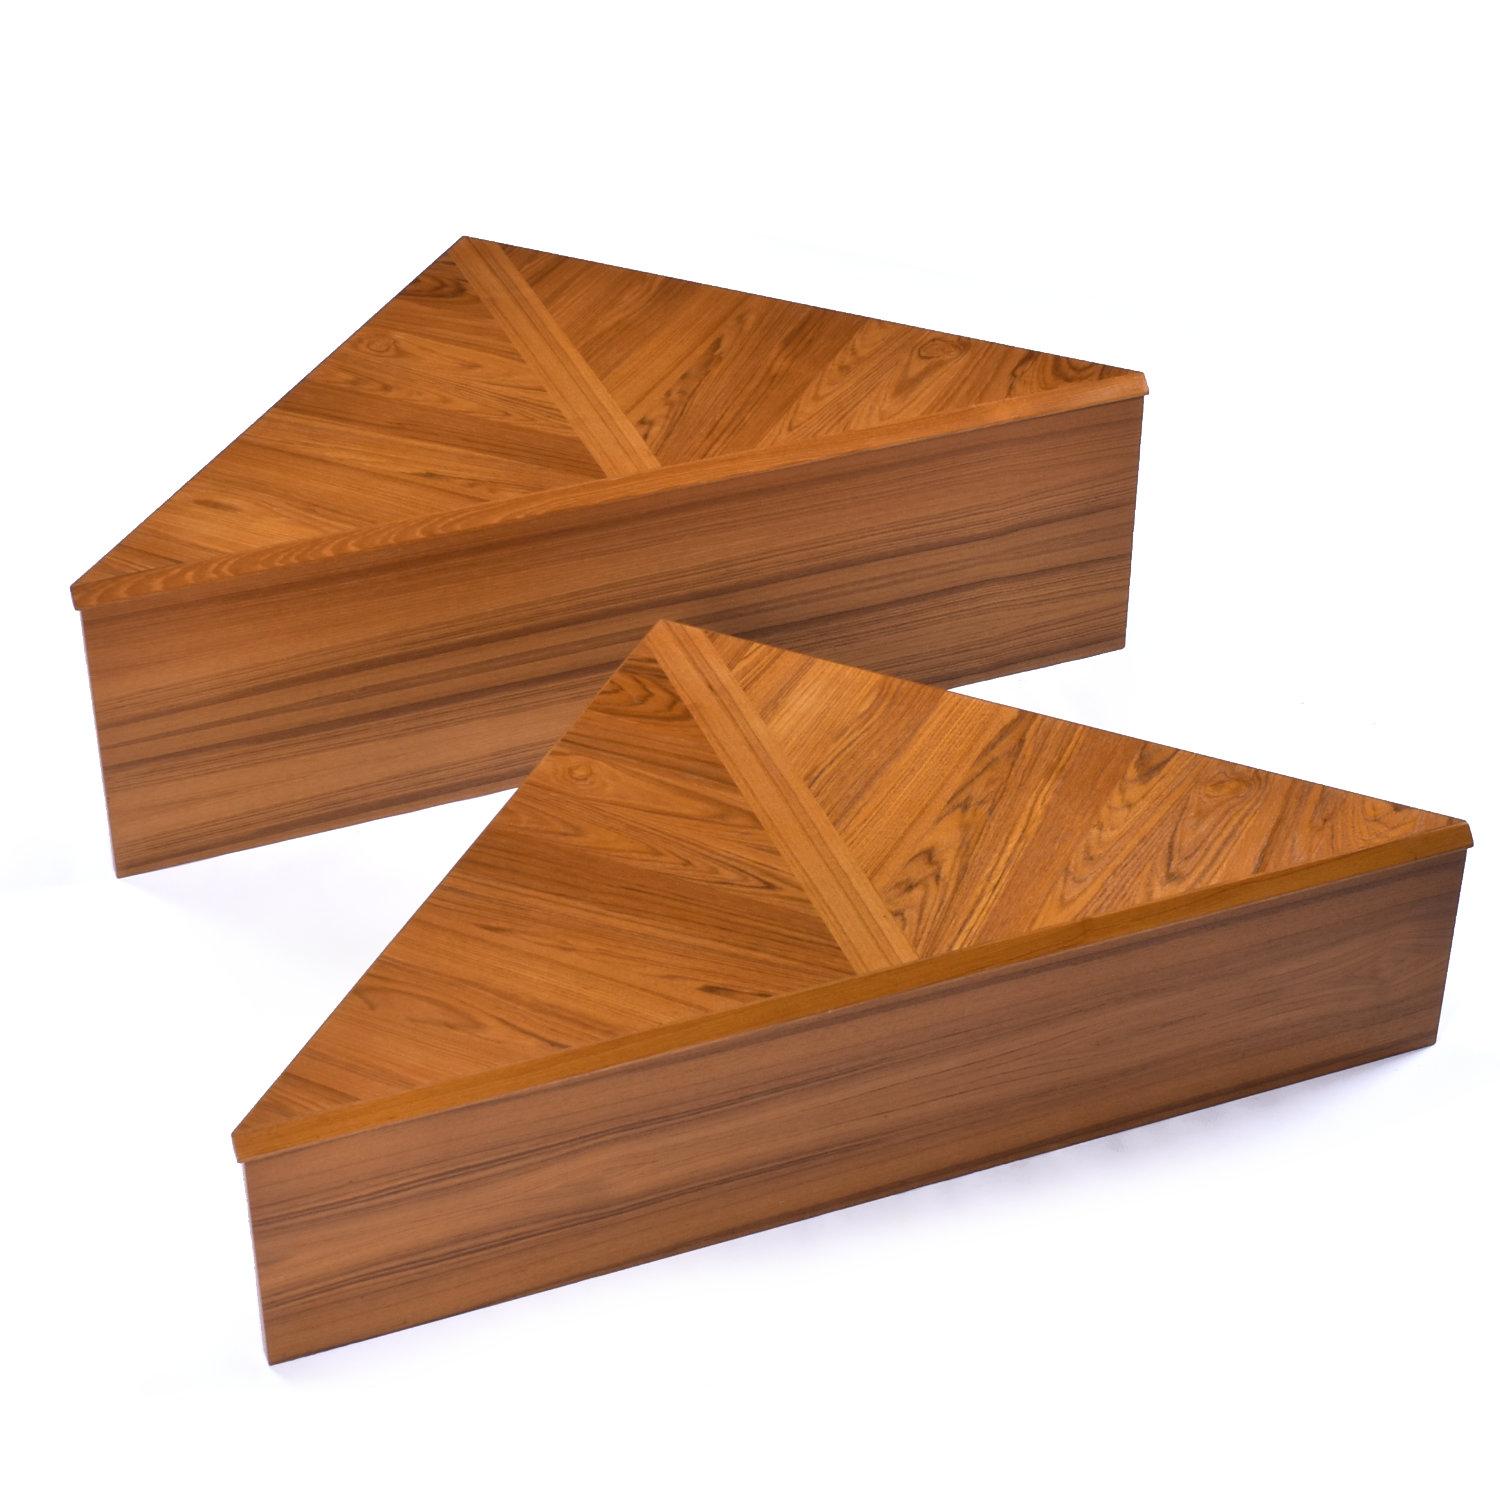 Pair of refinished Danish teak modular table set by Laurits M Larsen. These triangular tables are super versatile! Join them in any orientation to create a coffee table. The pieces are large enough to use independently as a coffee table and the or